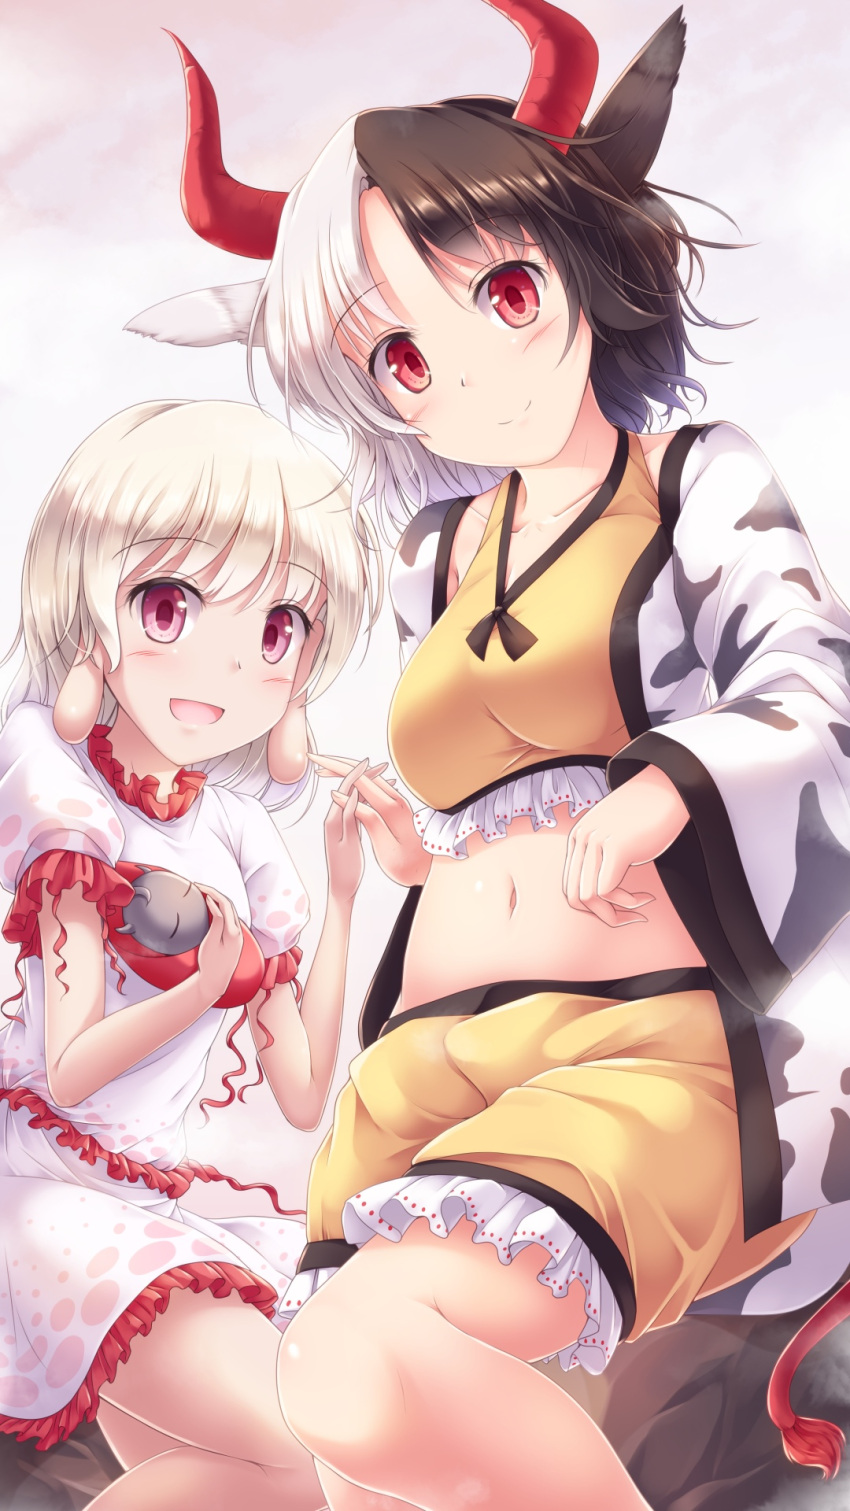 2girls :d animal_ears animal_print black_hair commentary_request cow_print ebisu_eika eyebrows_visible_through_hair highres holding_hands horns interlocked_fingers long_sleeves looking_at_viewer lzh midriff multicolored_hair multiple_girls navel open_mouth puffy_short_sleeves puffy_sleeves red_eyes short_sleeves shorts smile touhou two-tone_hair ushizaki_urumi white_hair wide_sleeves yellow_shorts